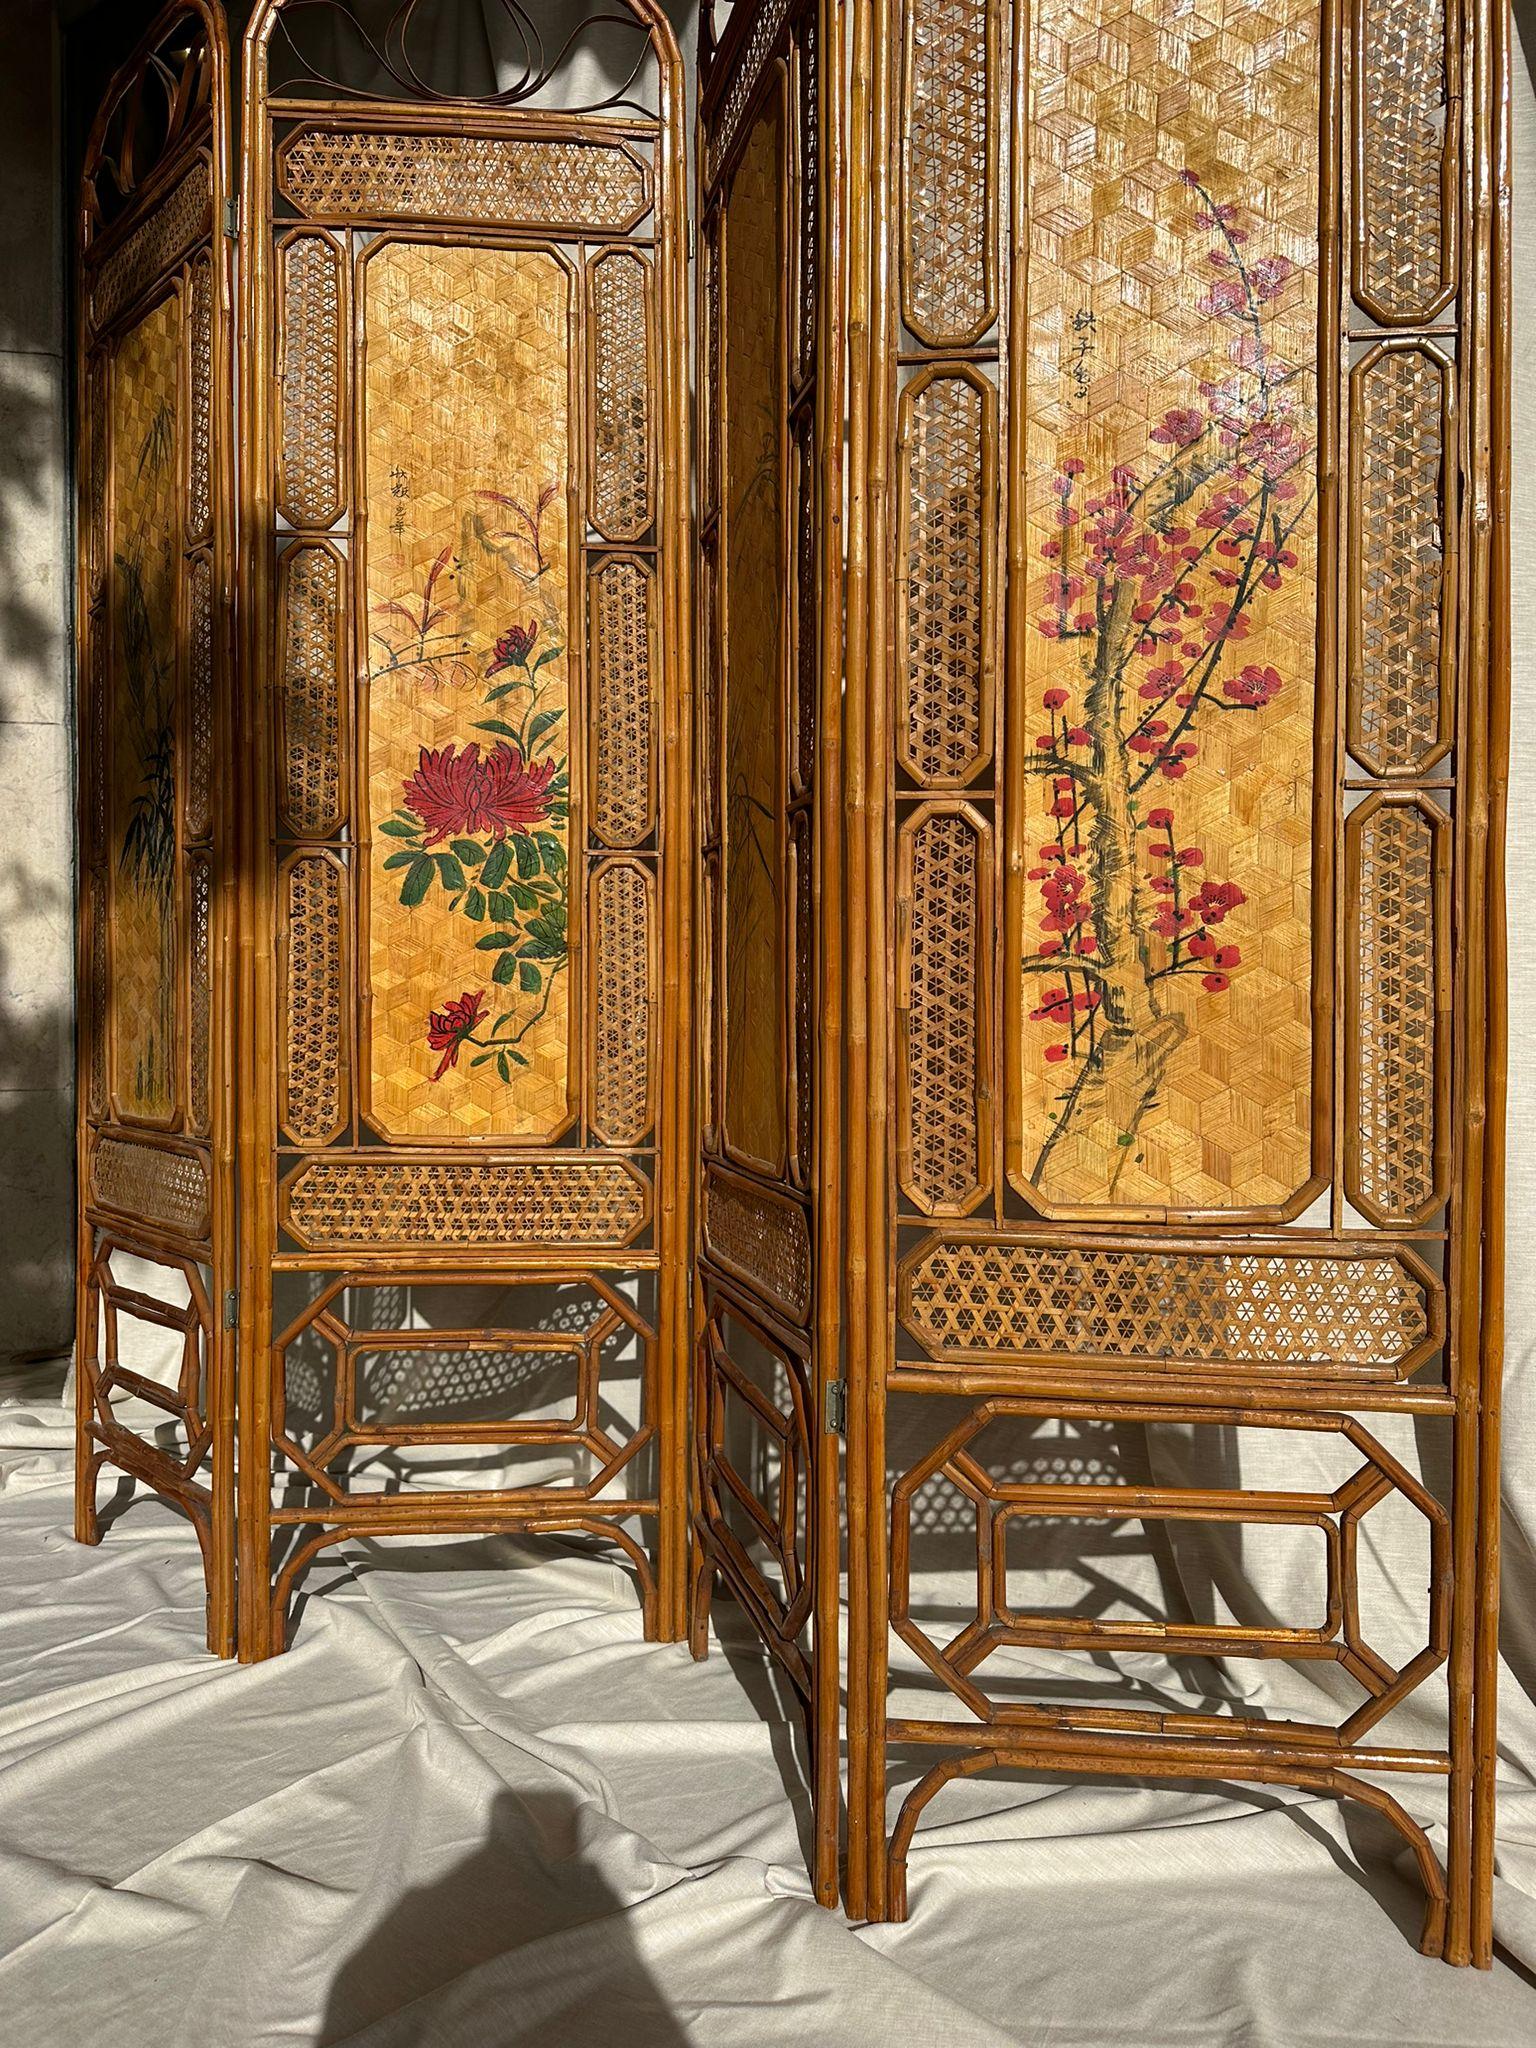 An house hold must is a well elaborated Folding Screen.

This one made specially in Rattan has two diferrent motives on each side that reveal the landscape and nature features found in long time ago China.

Intrically perfurated around their 4